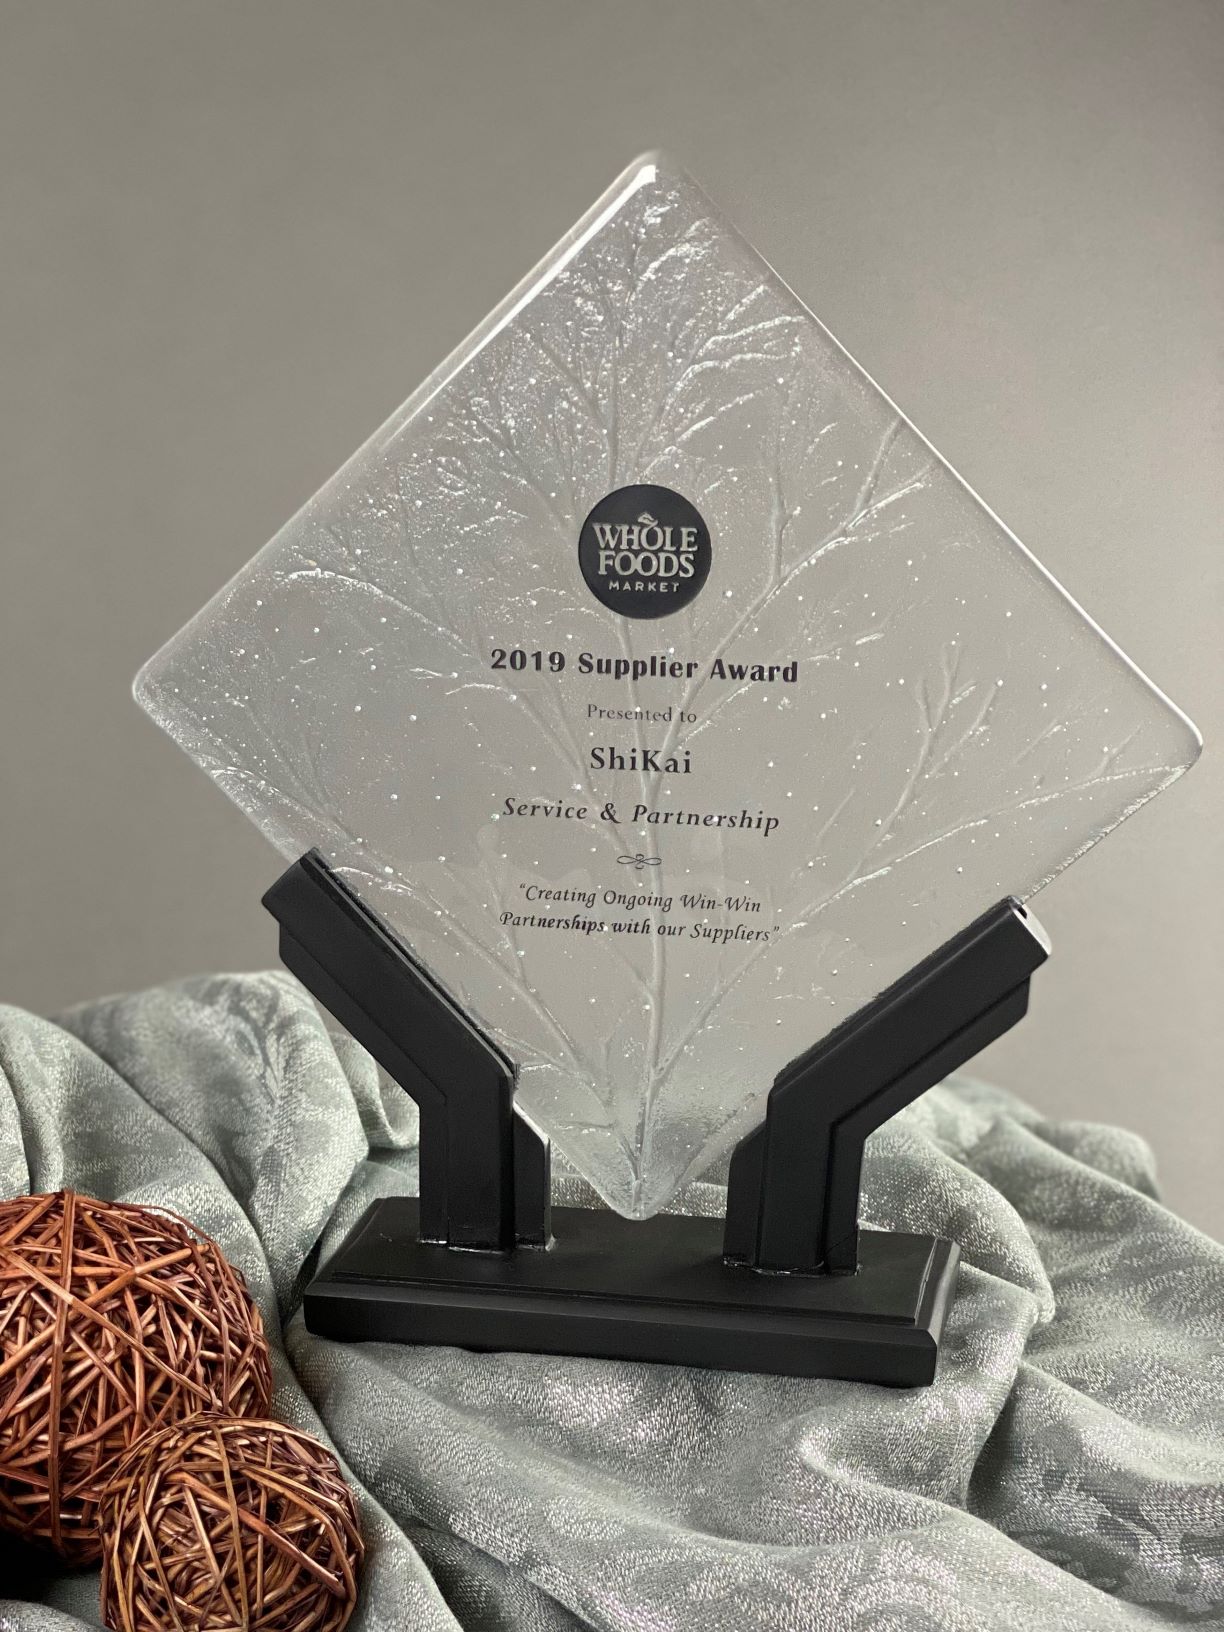 Whole Foods Market named ShiKai a 2019 Supplier of the Year